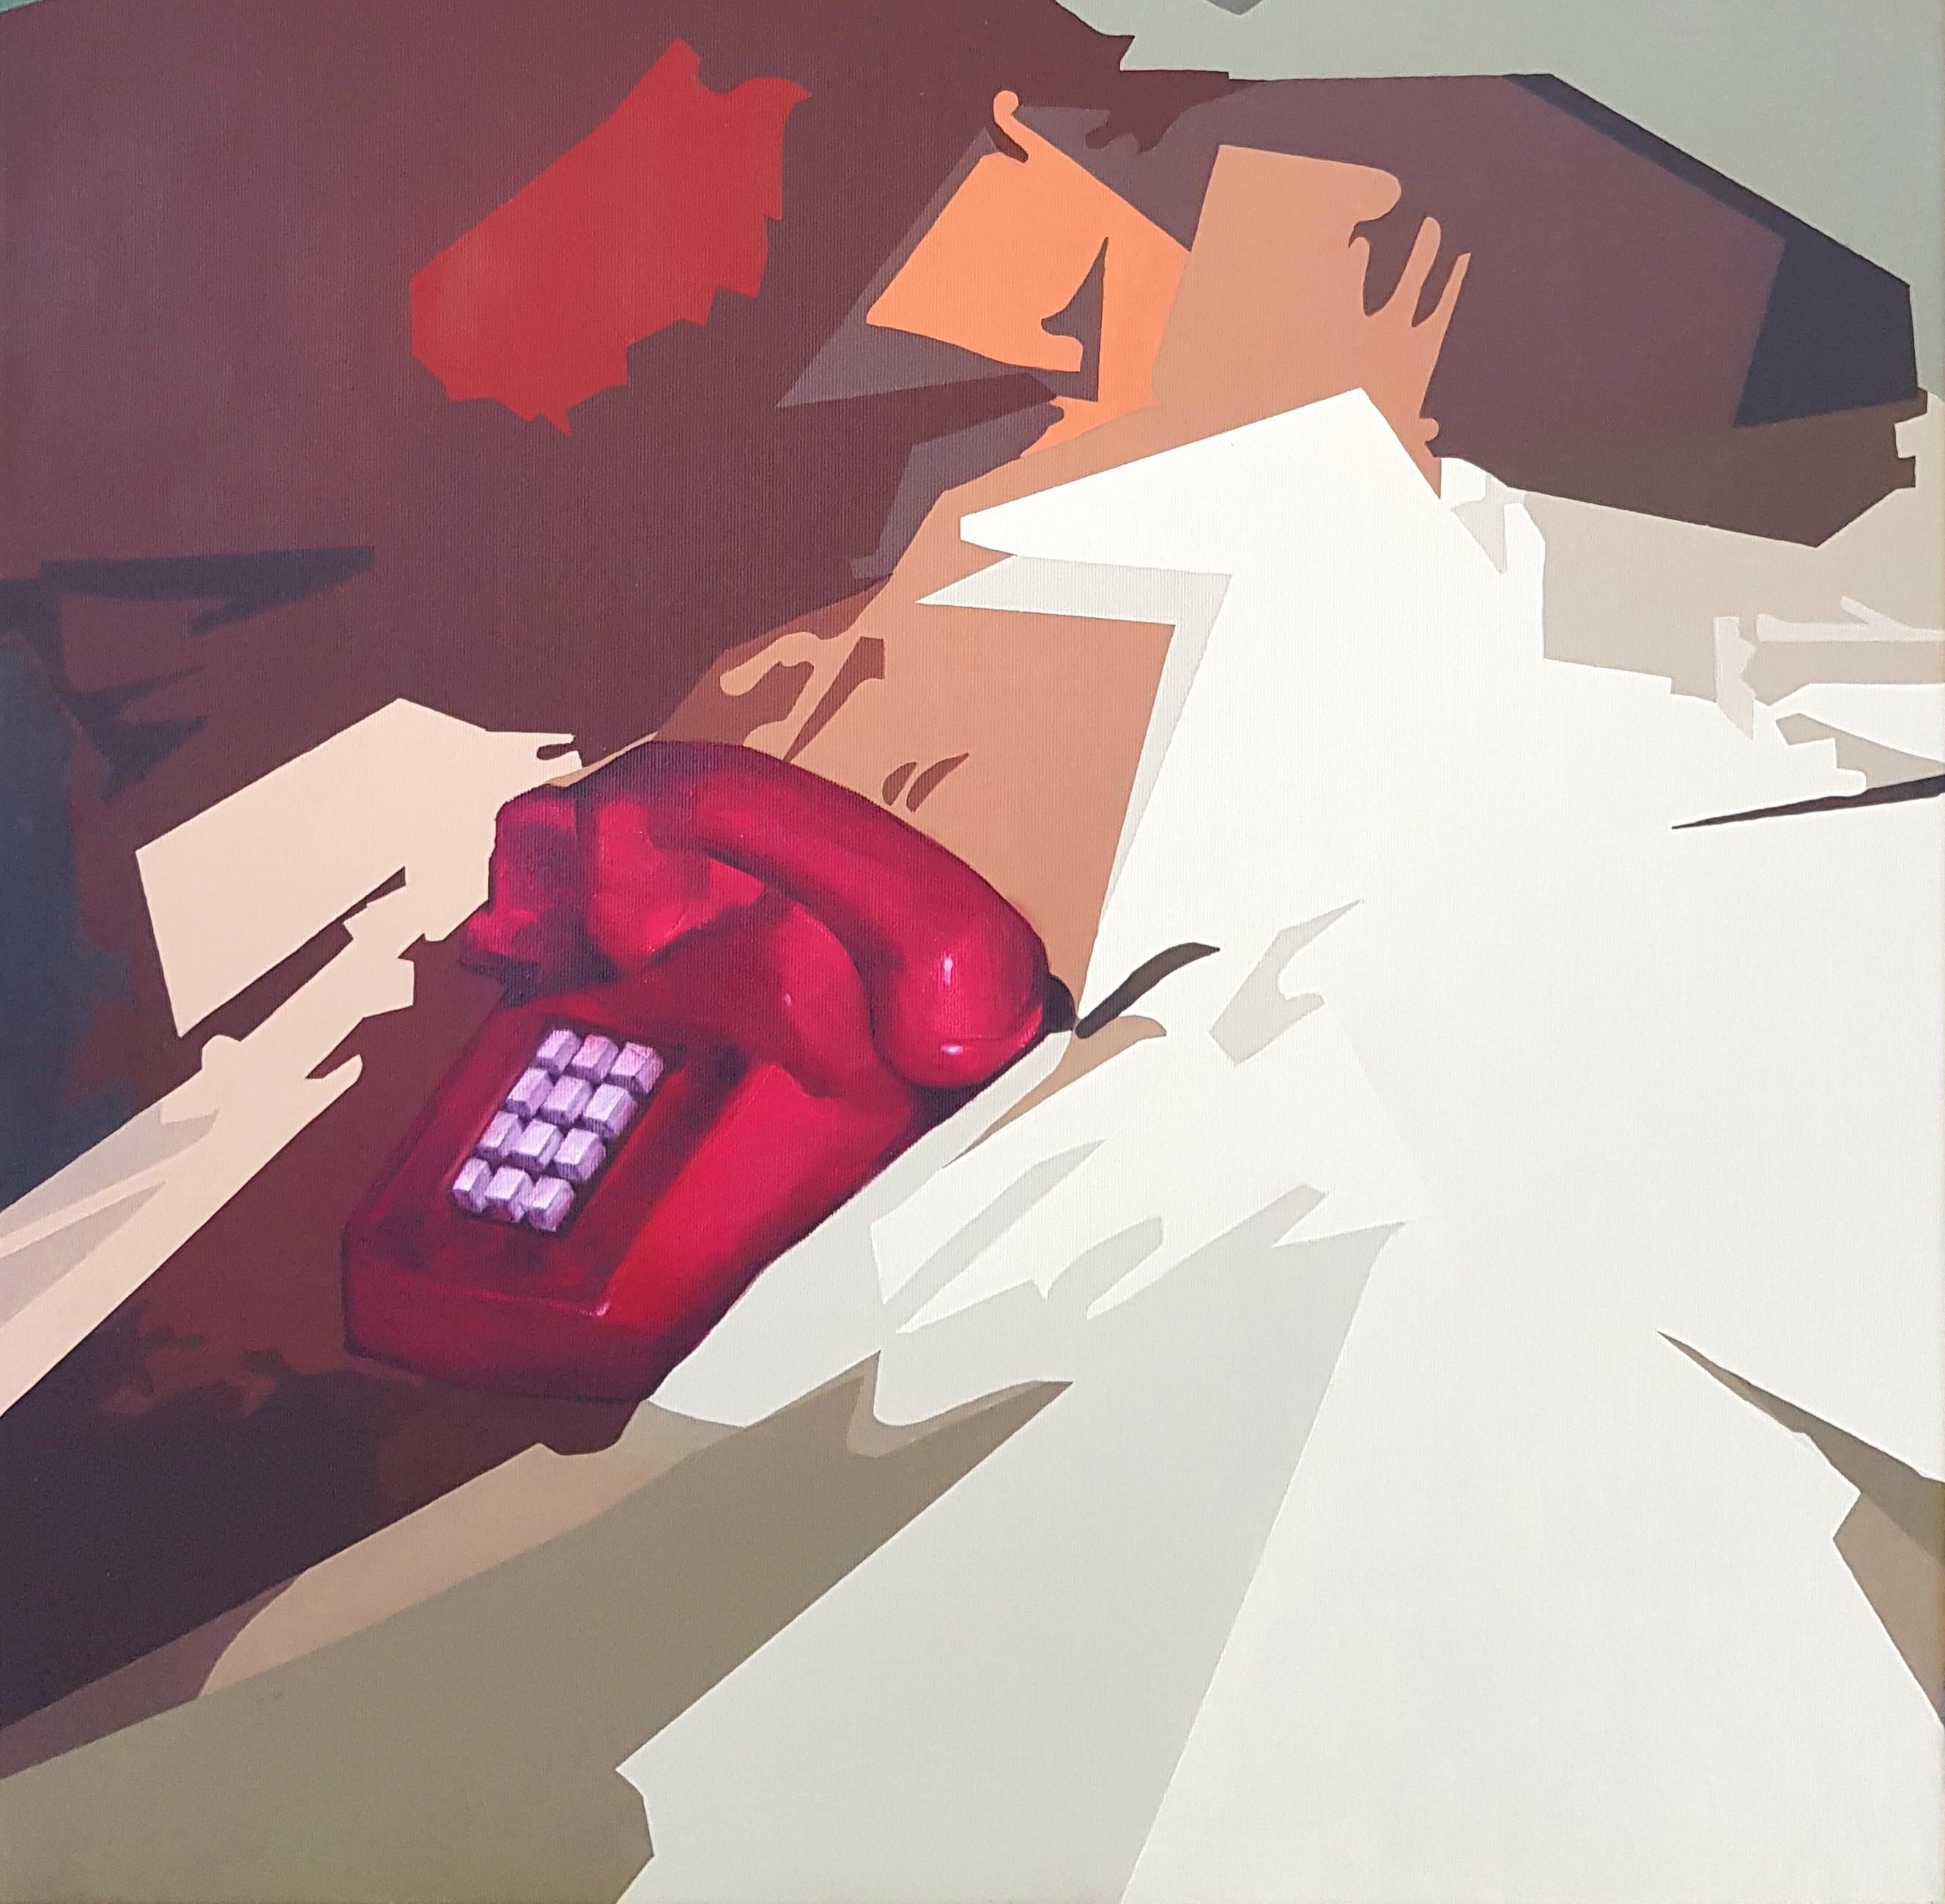 The Other Red Phone Call - 21st Century, White, Female, Love, Figurative, Red - Contemporary Painting by Radu Rodideal